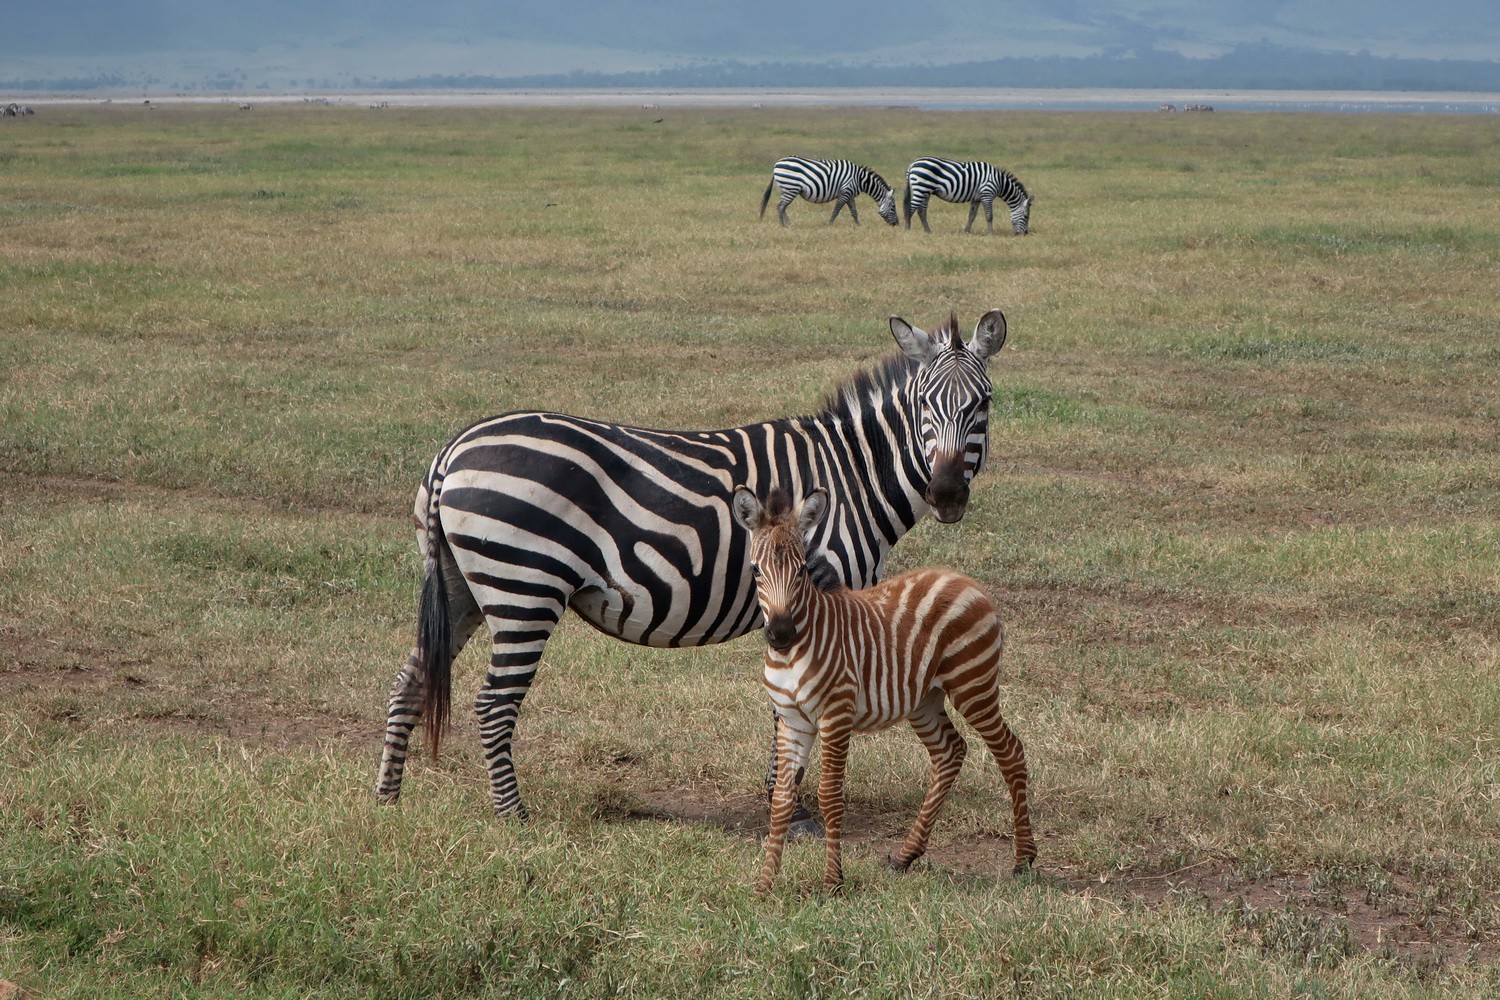 Zebras with a youngster